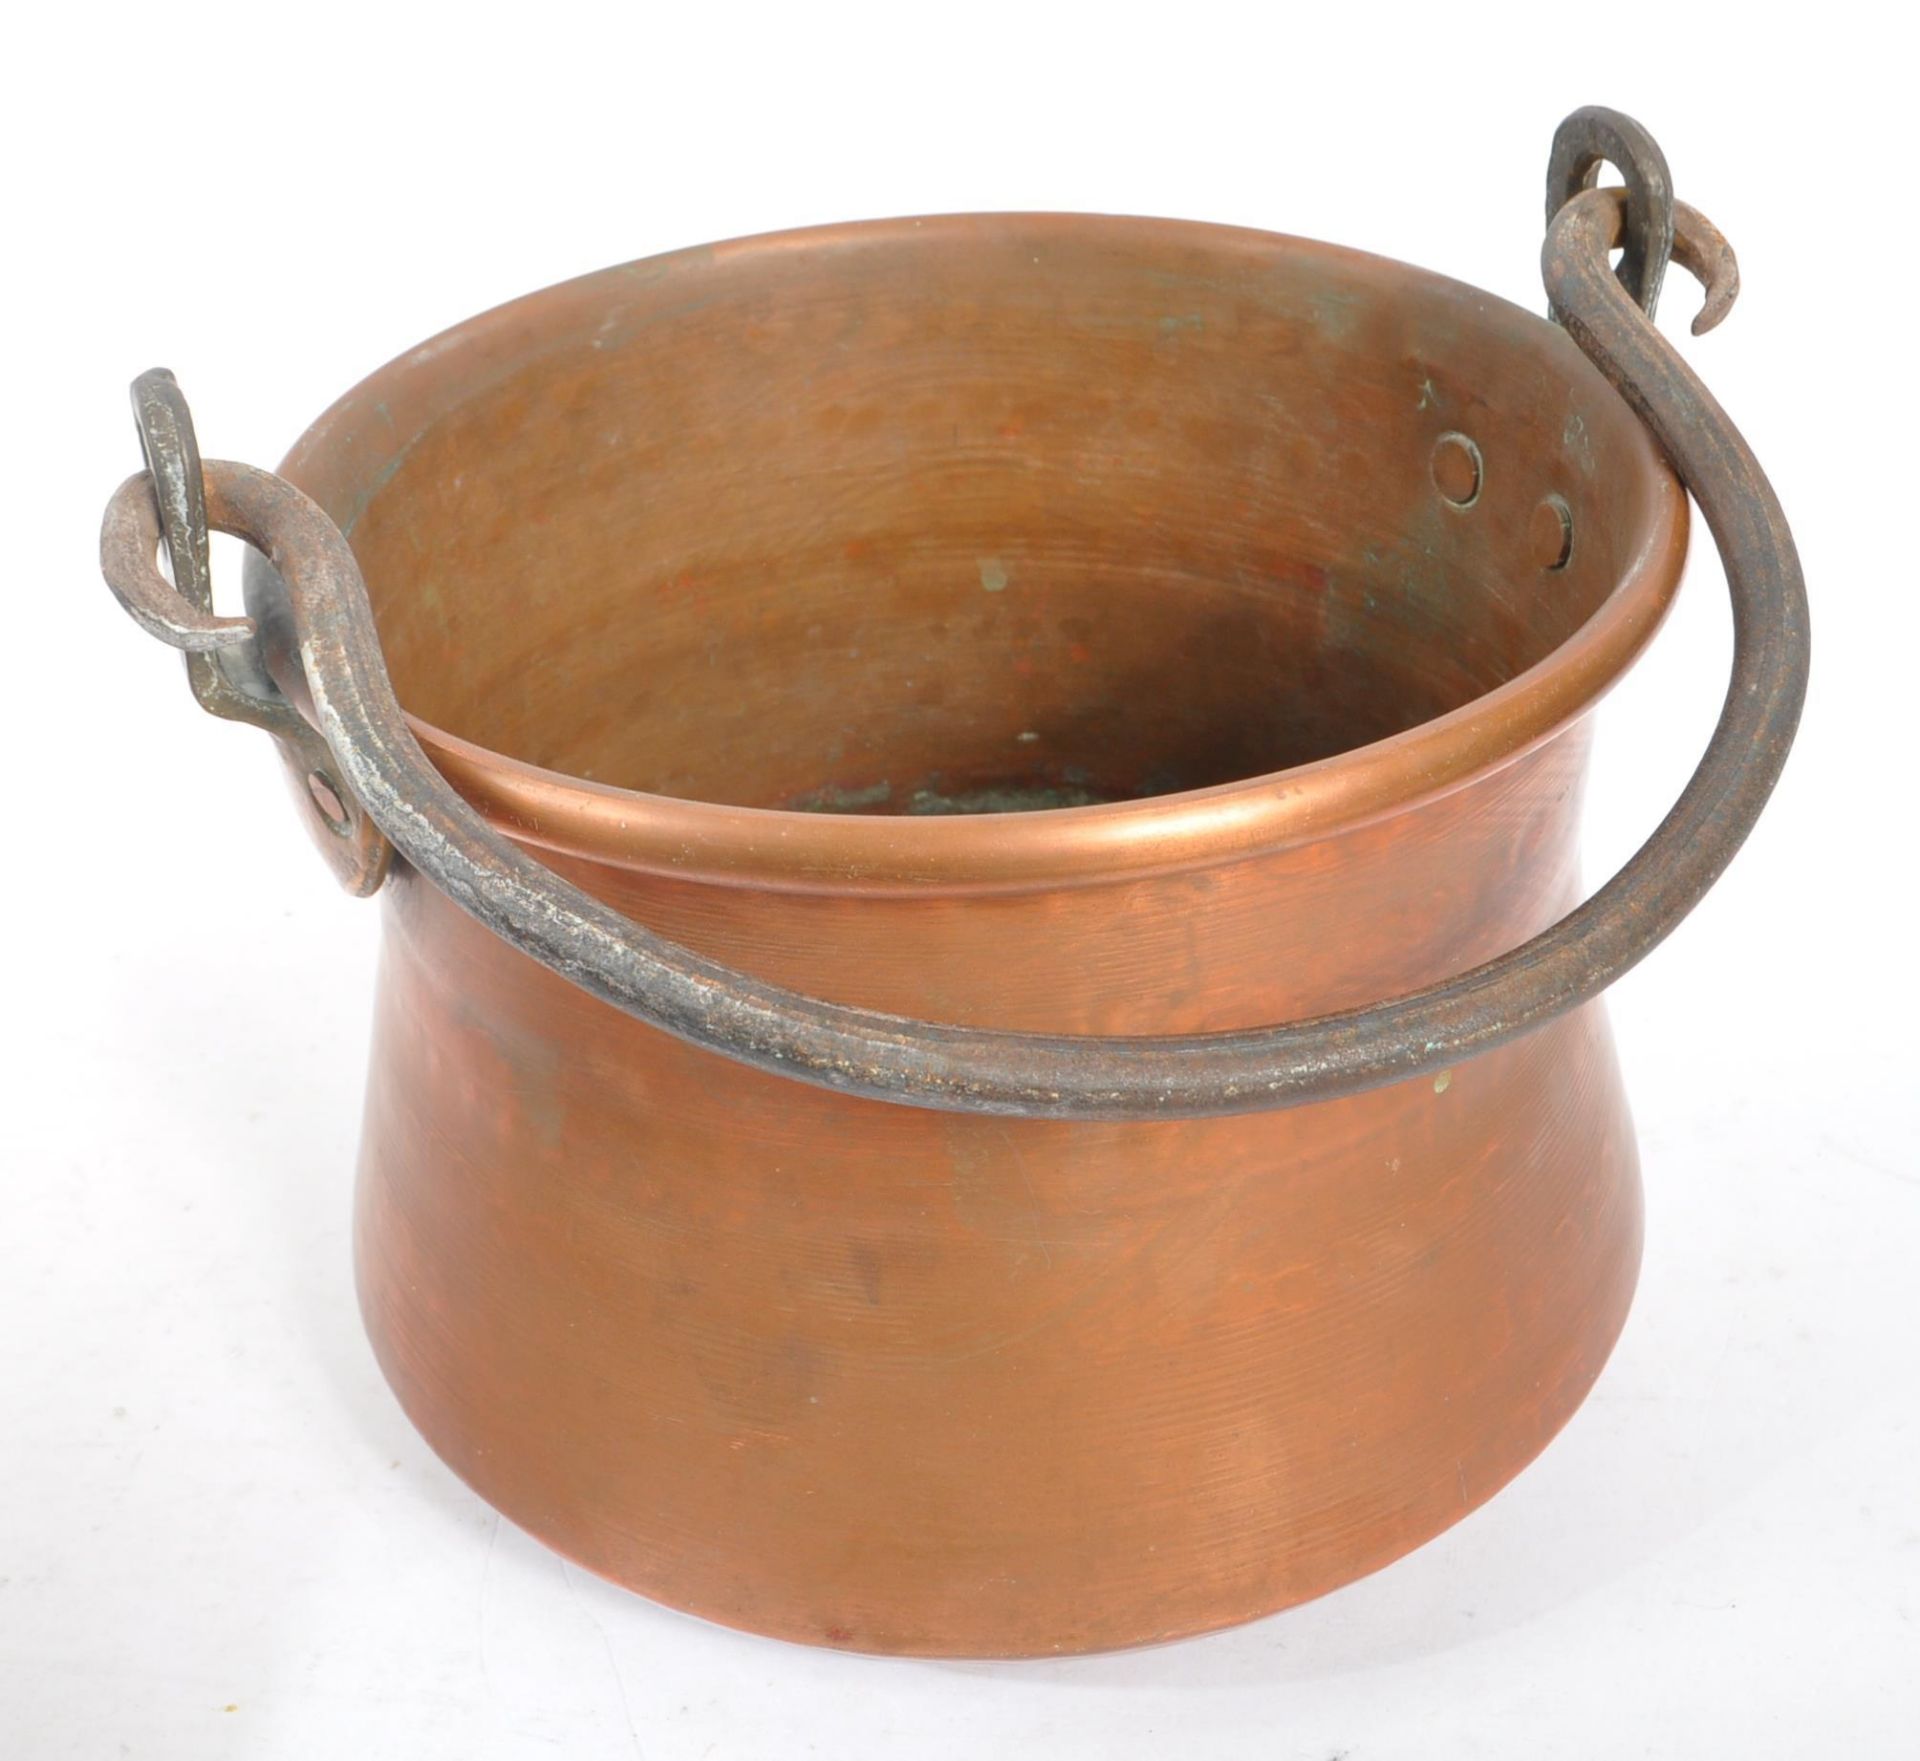 EARLY 20TH CENTURY MIDDLE EASTERN COPPER COOKING PAN / WOK - Image 2 of 5